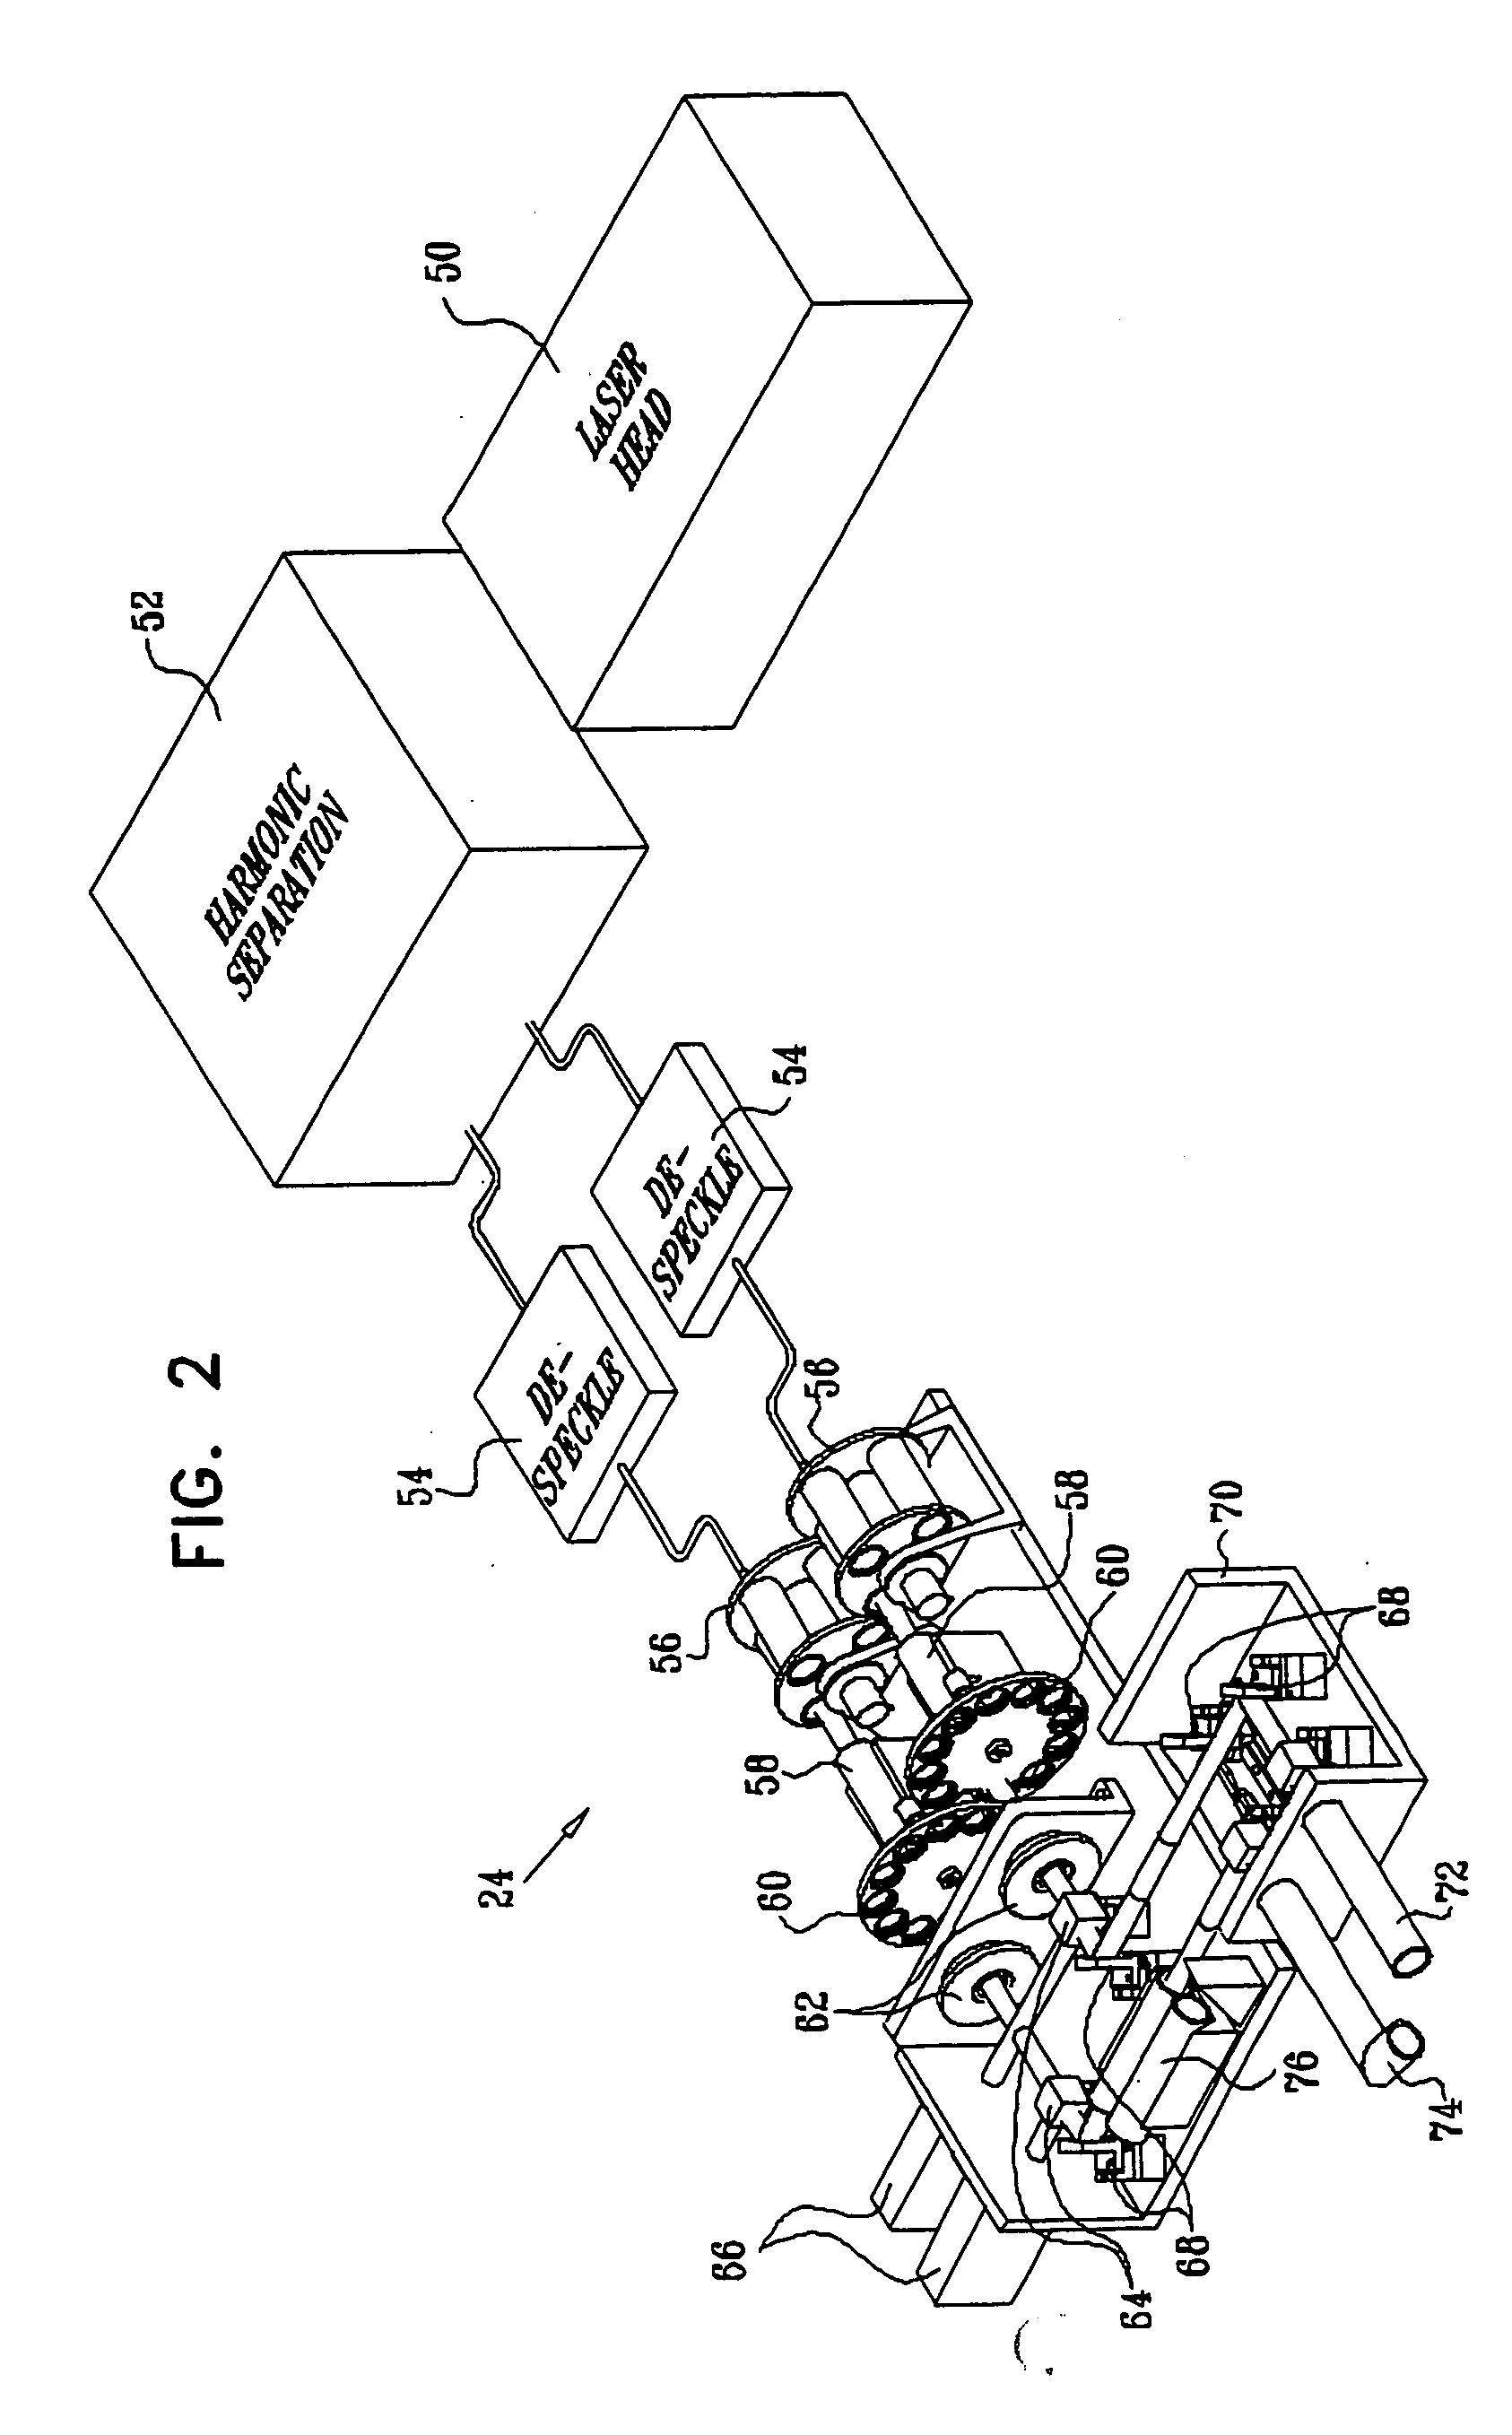 Illumination system for optical inspection